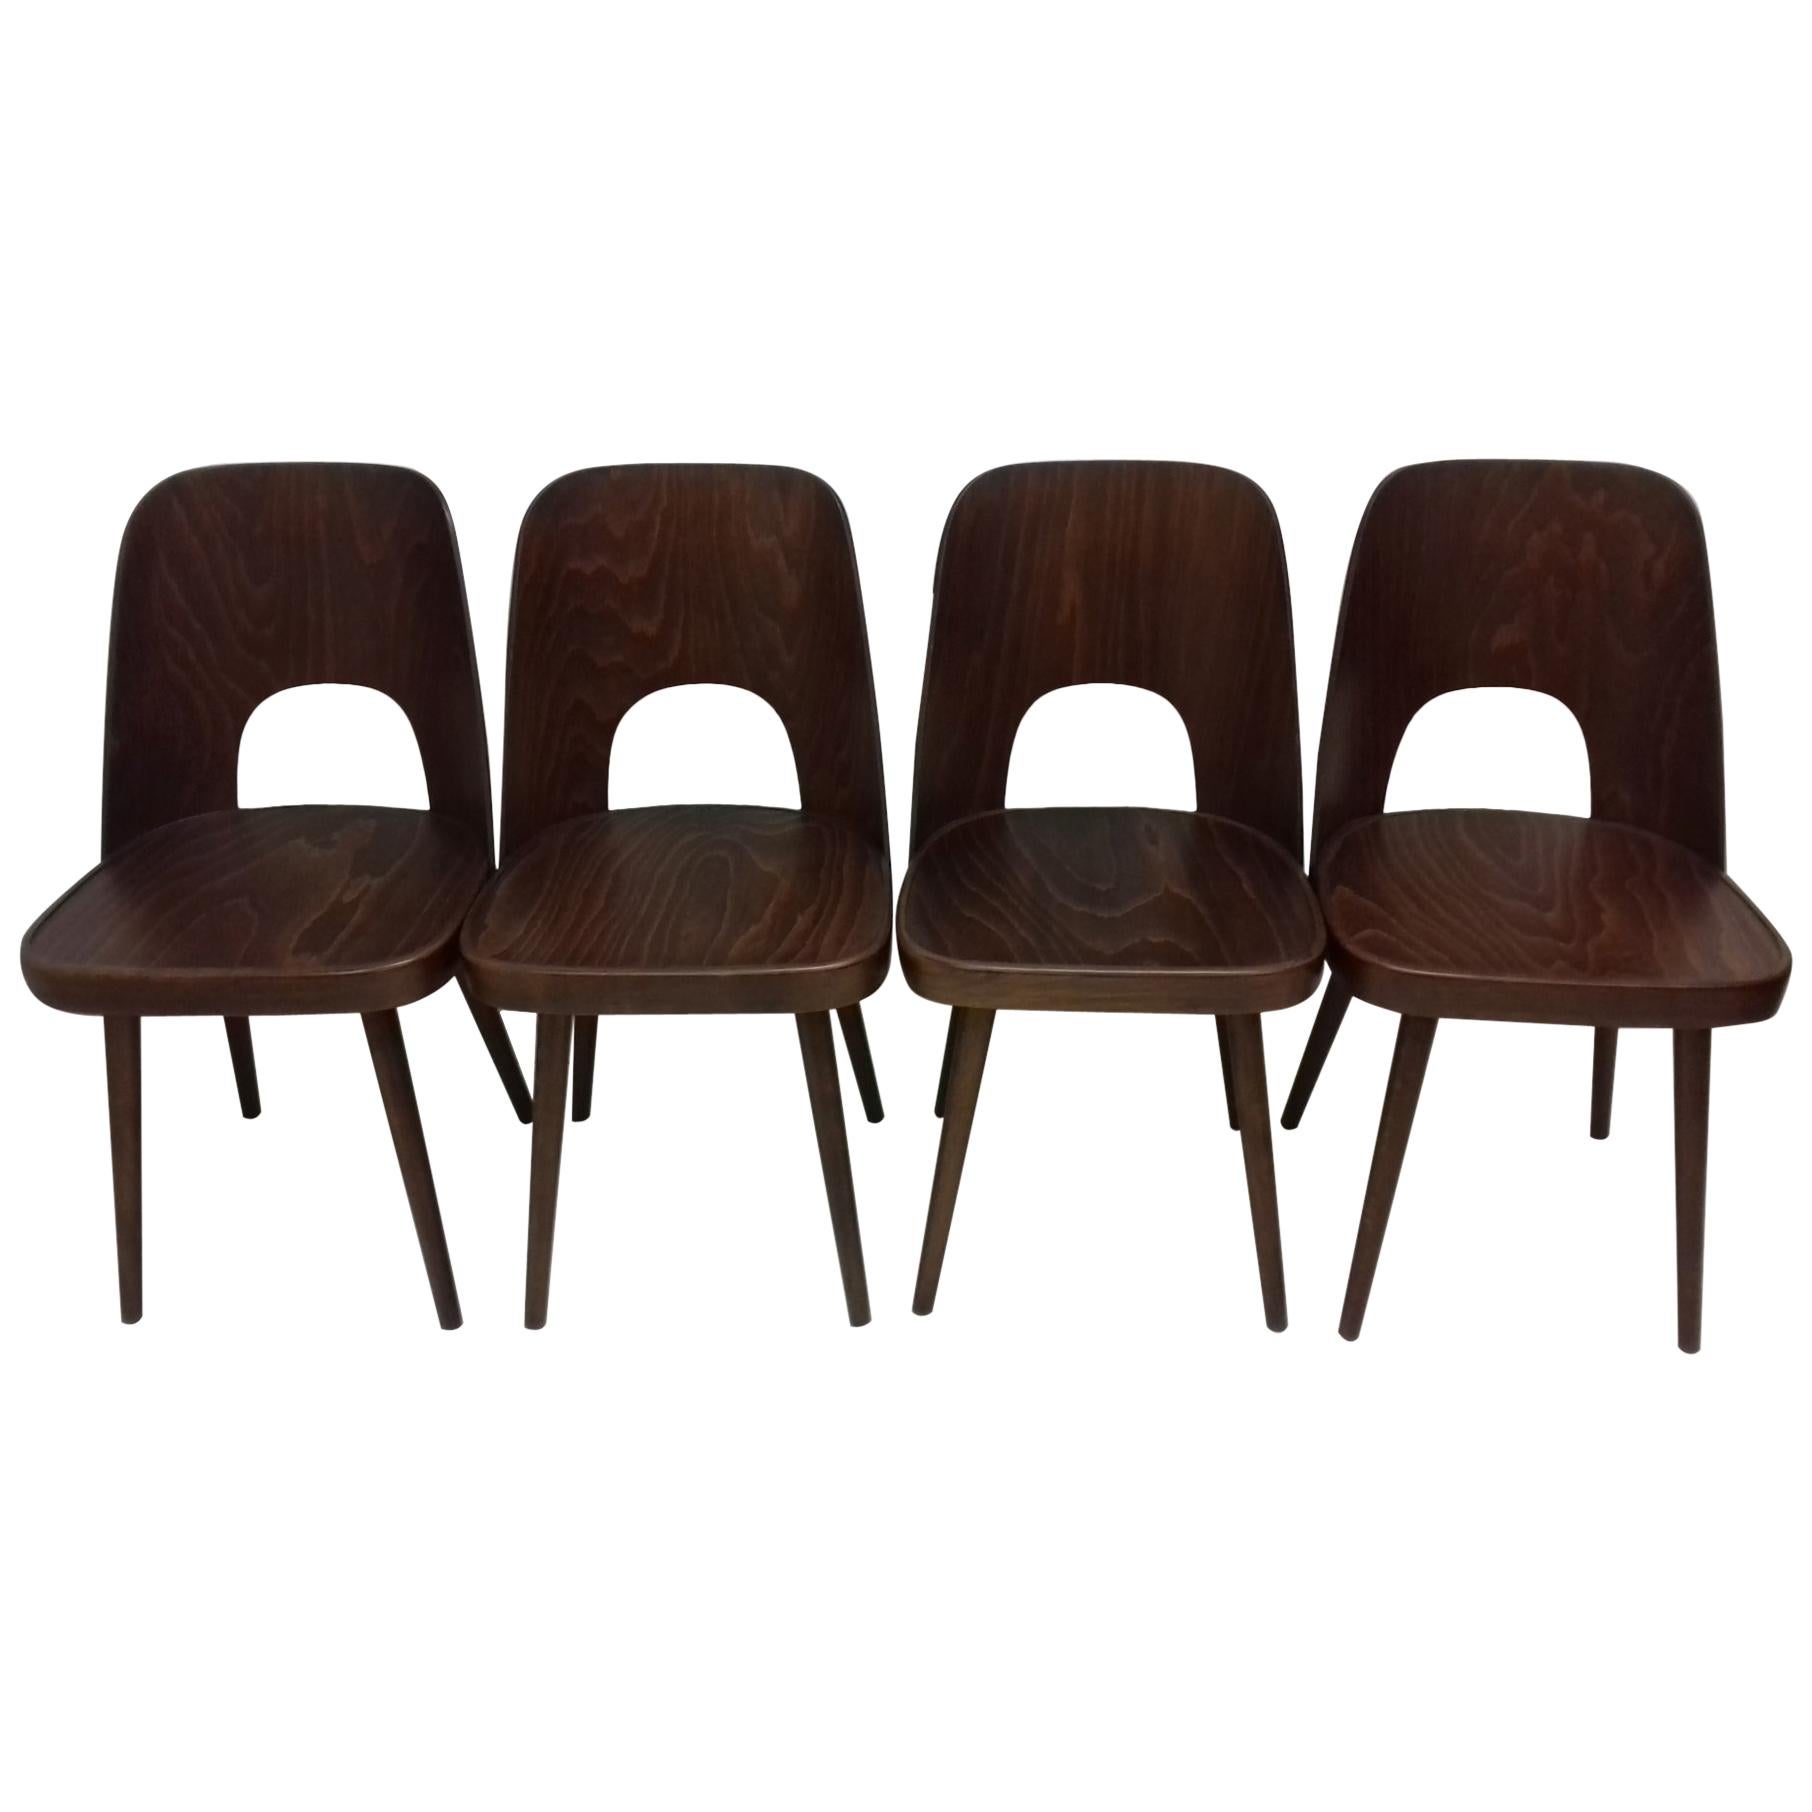 Set of Four Wooden Chairs Designed by Oswald Haerdtl, 1950s For Sale